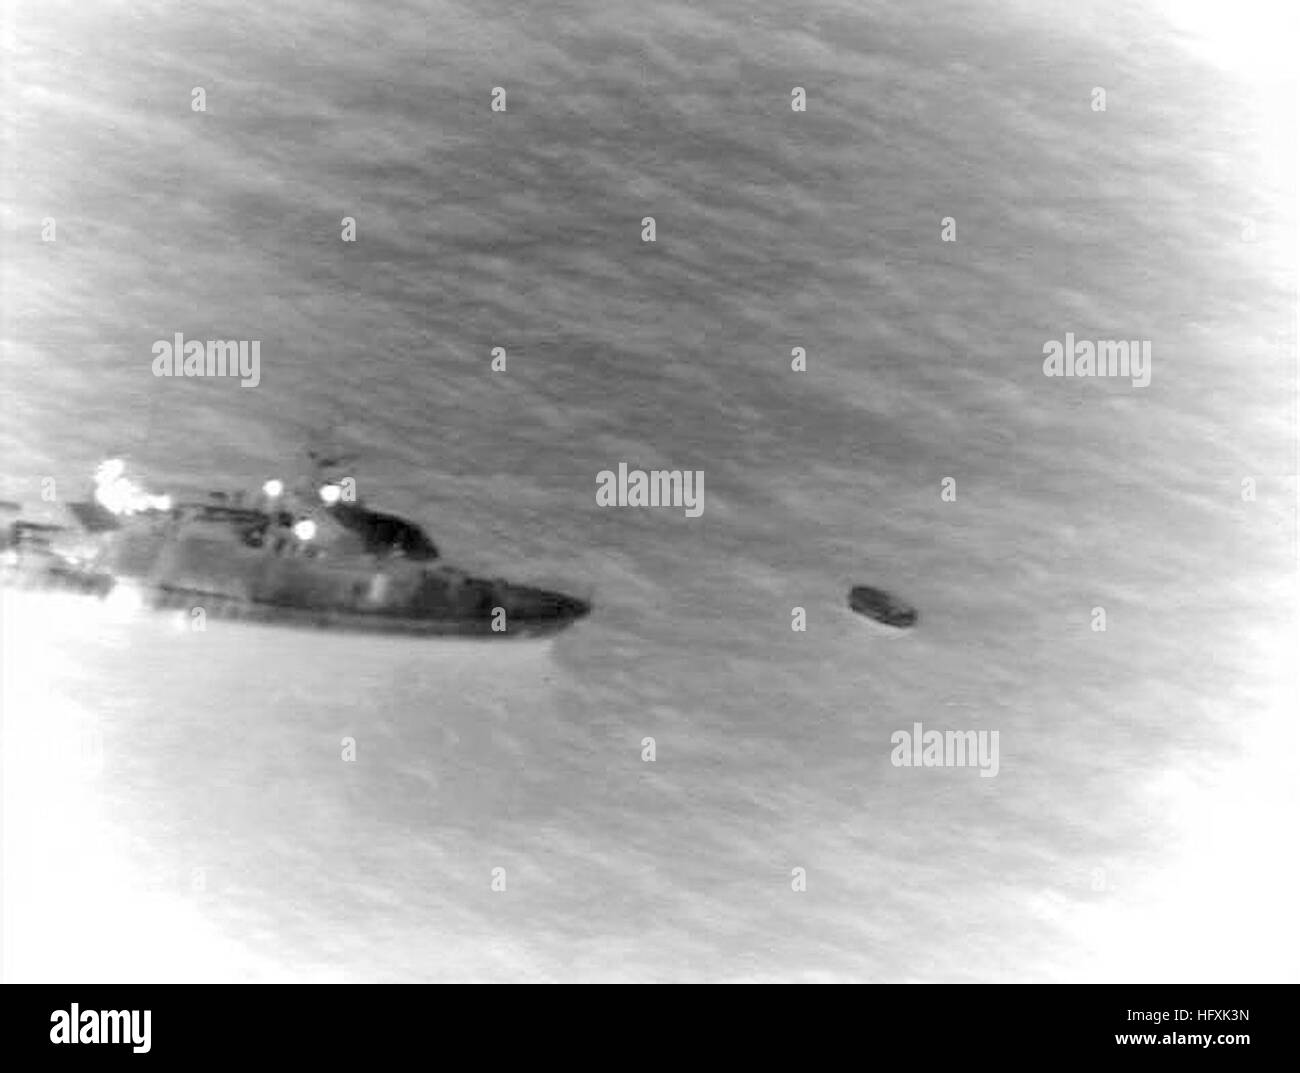 060204-N-0000N-004  RED SEA (Feb 4, 2006) - Infrared imagery taken from a U.S. Navy P-3C Orion maritime patrol aircraft, assisting in search and rescue operations for survivors of the Egyptian ferry Al Salam Boccaccio 98 in the Red Sea, shows a rescue vessel alongside a life raft.  The aircraft, assigned to the Golden Swordsmen of Patrol Squadron (VP-47), flew for almost 15 hours during the mission to assist local authorities in the search efforts.  VP-47 is homeported at Marine Corps Base Hawaii, Kaneohe Bay, and is currently supporting missions in the U.S. Central Command (USCENTCOM) area of Stock Photo